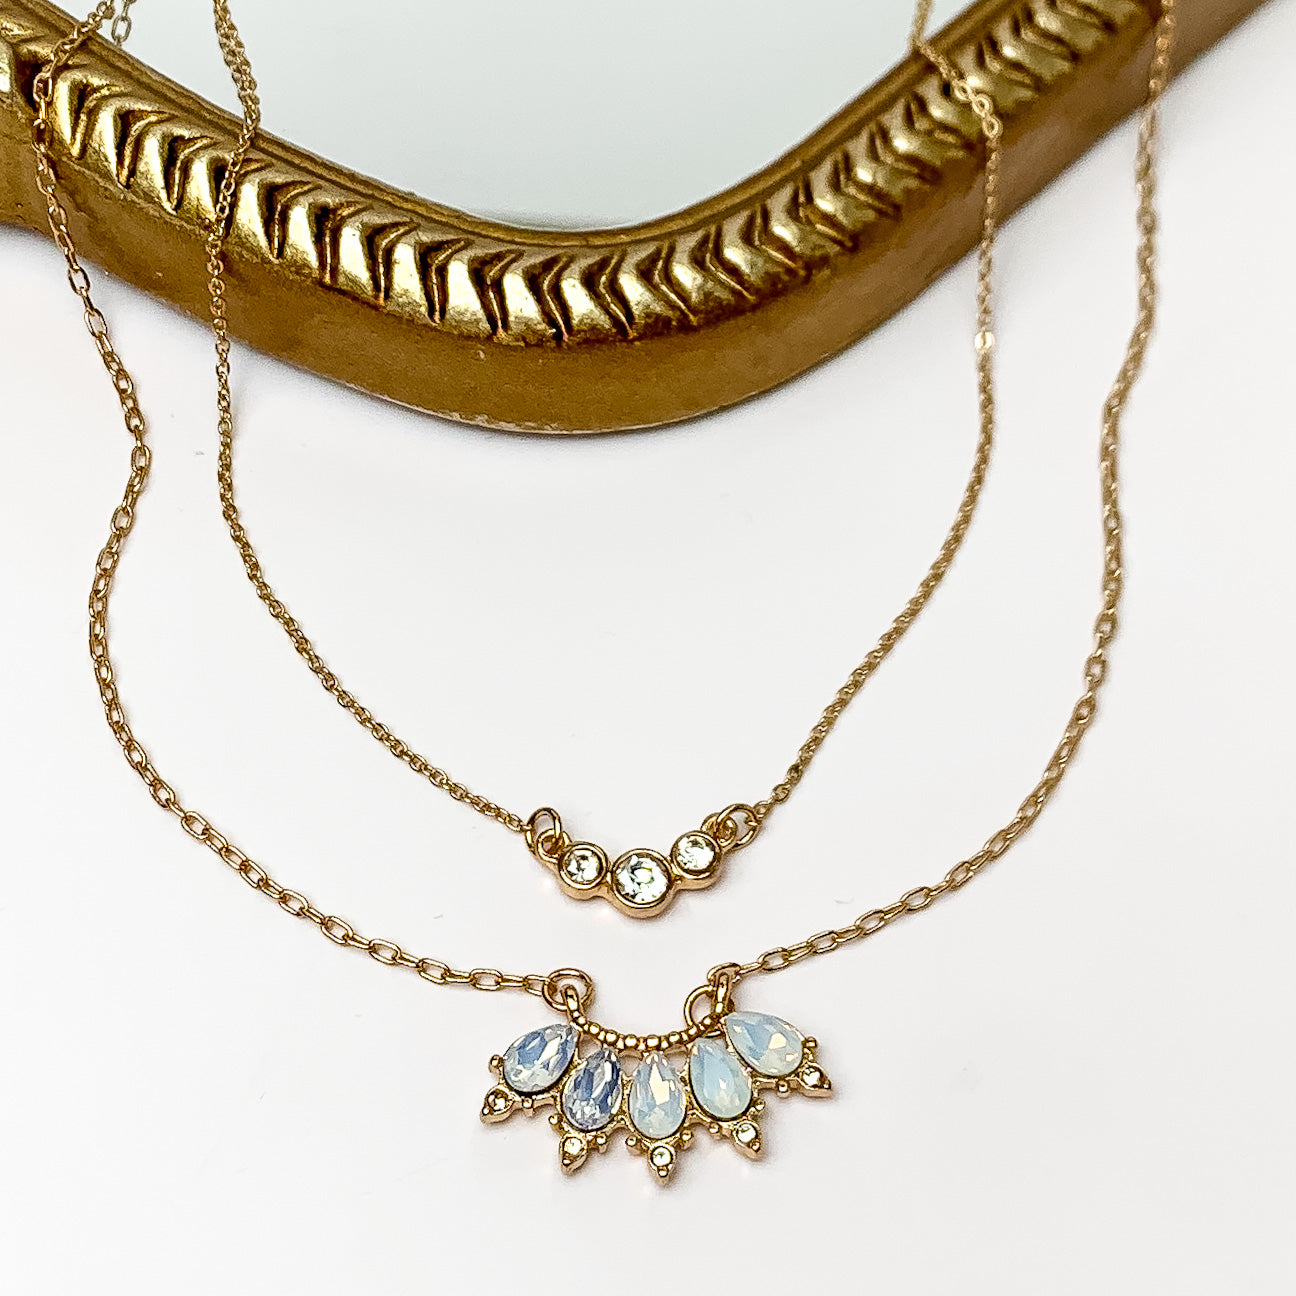 Dazzling Gold Tone Necklace With White Opal Crystals. Pictured on a white background with a gold frame behind the necklace.